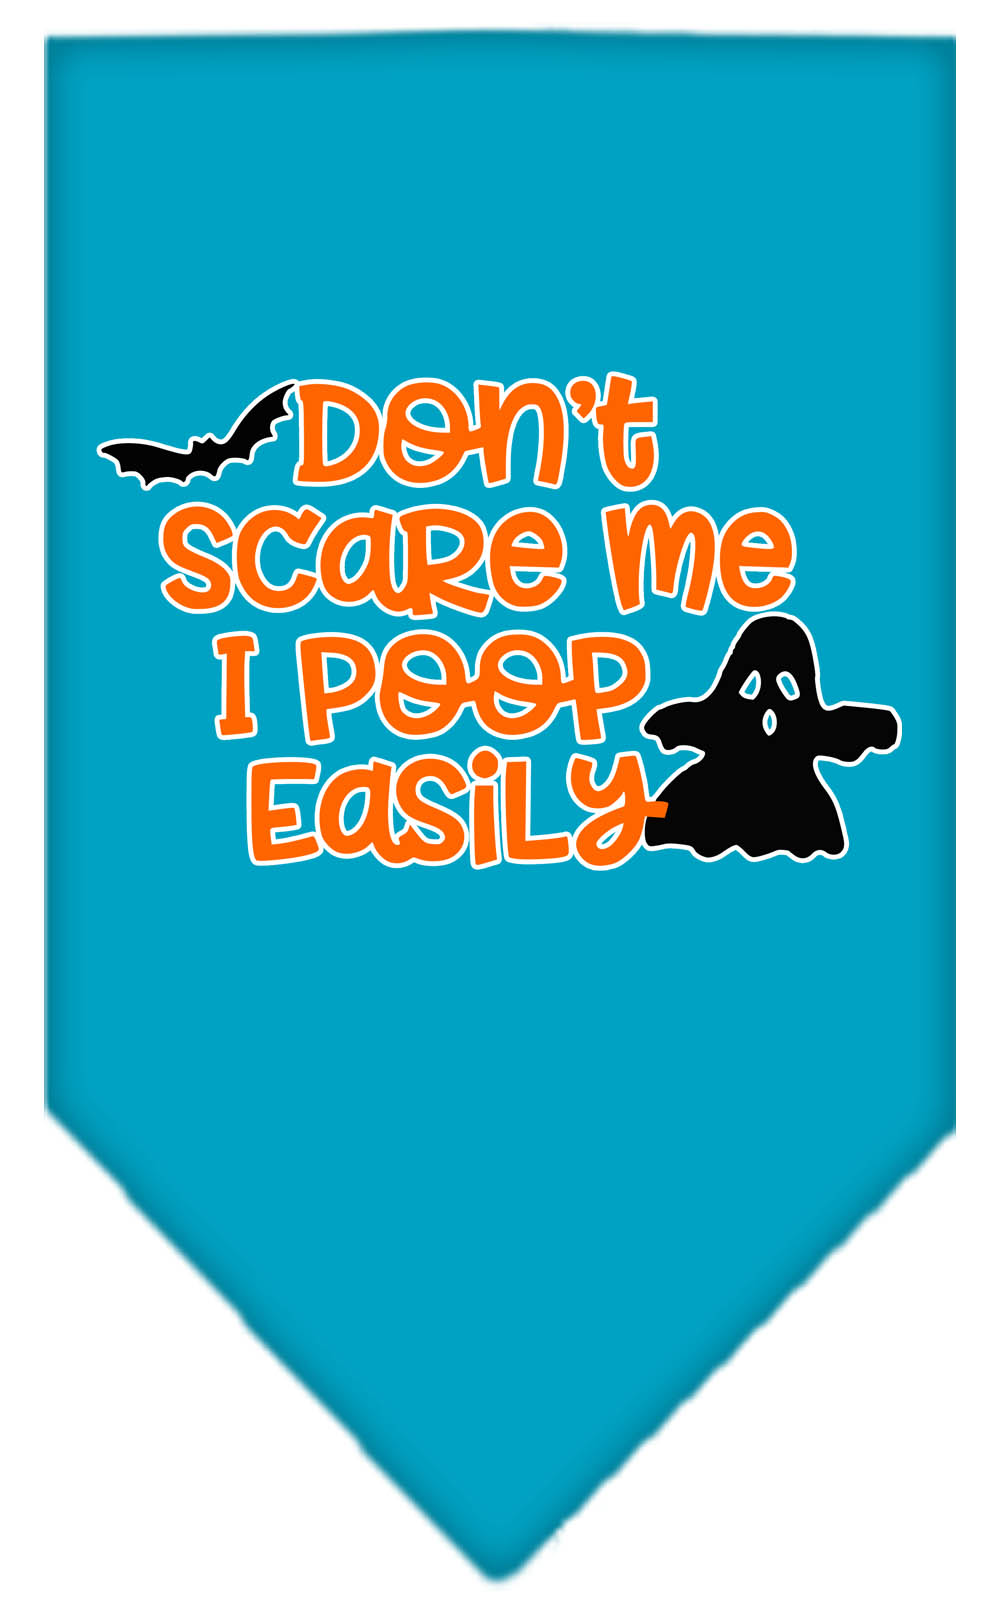 Don't Scare Me, Poops Easily Screen Print Bandana Turquoise Small